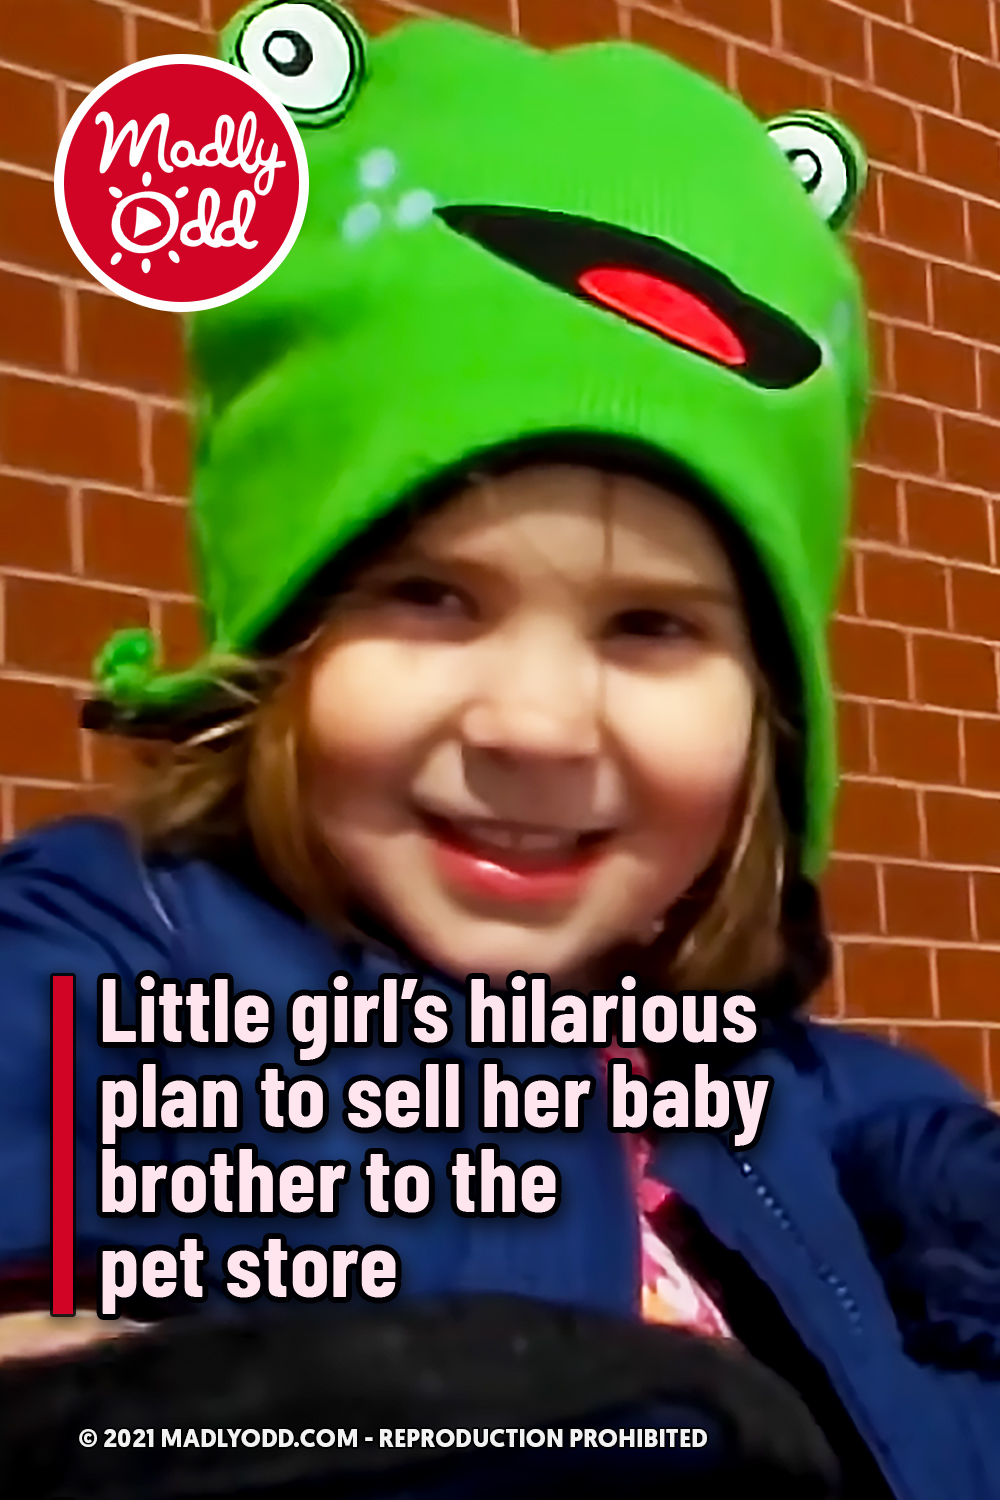 Little girl’s hilarious plan to sell her baby brother to the pet store